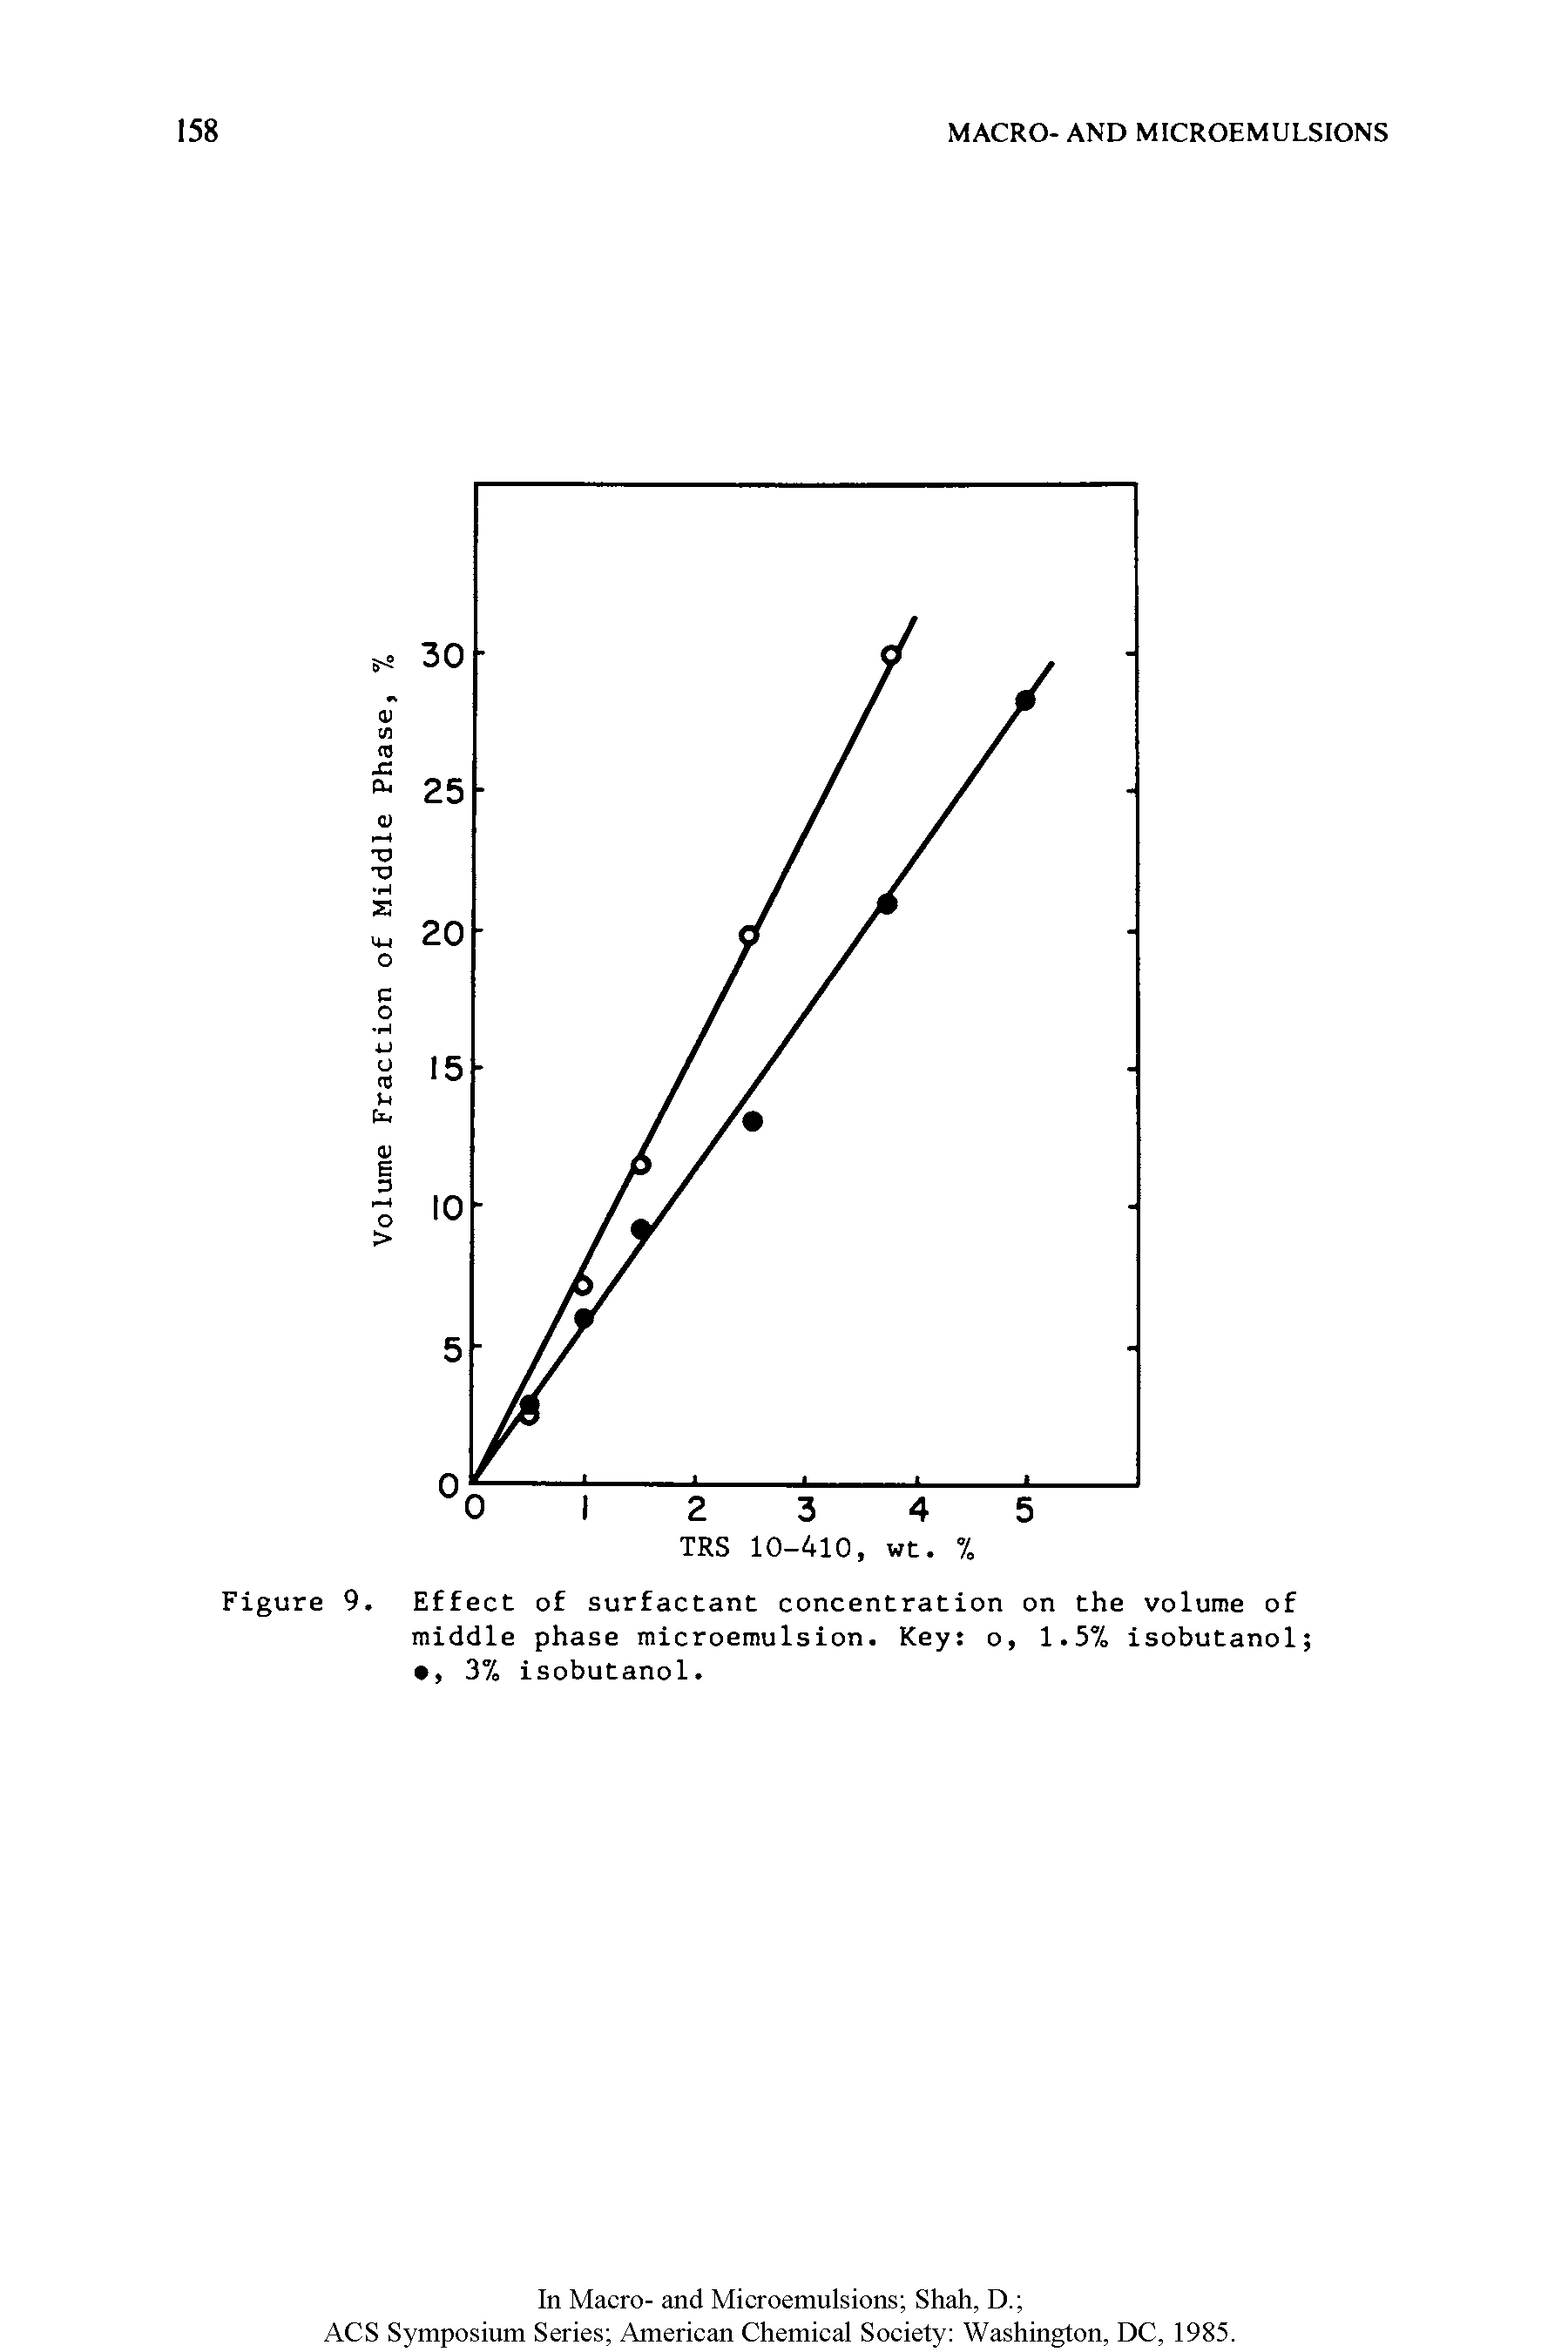 Figure 9. Effect of surfactant concentration on the volume of middle phase microemulsion. Key o, 1.5% isobutanol , 3% isobutanol.